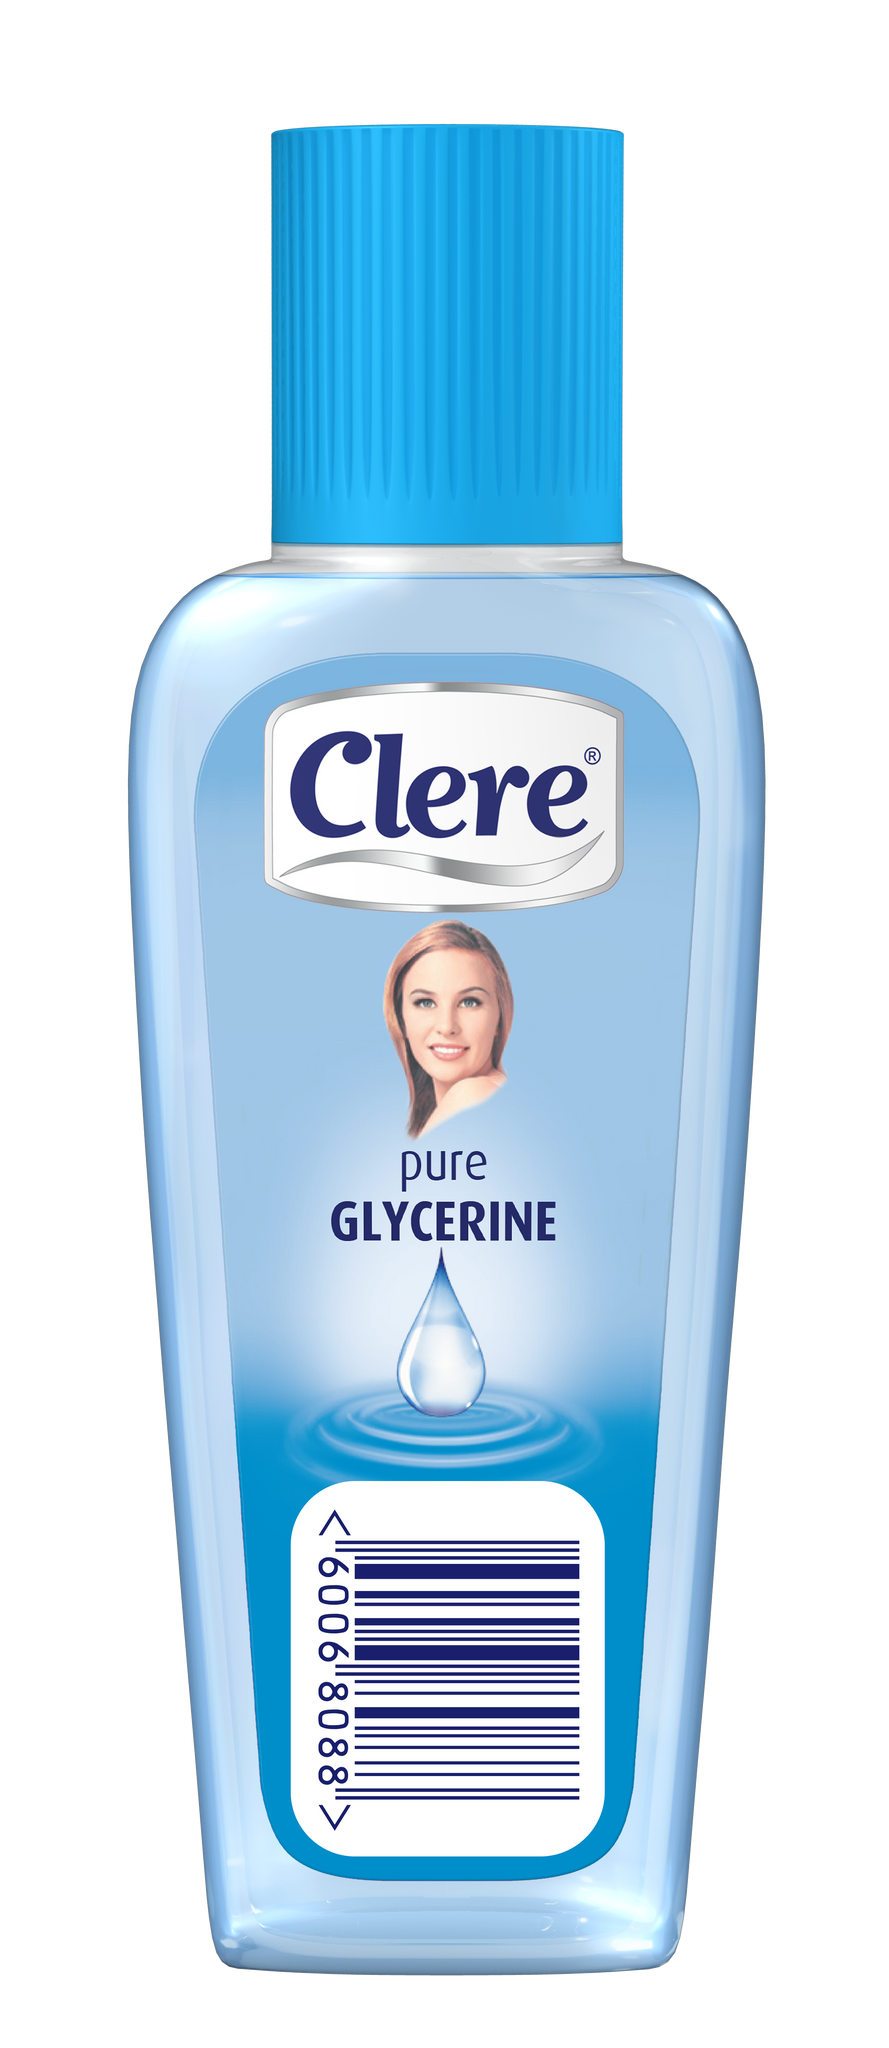 Clere - Pure Glycerine - 50ml 72-Pack